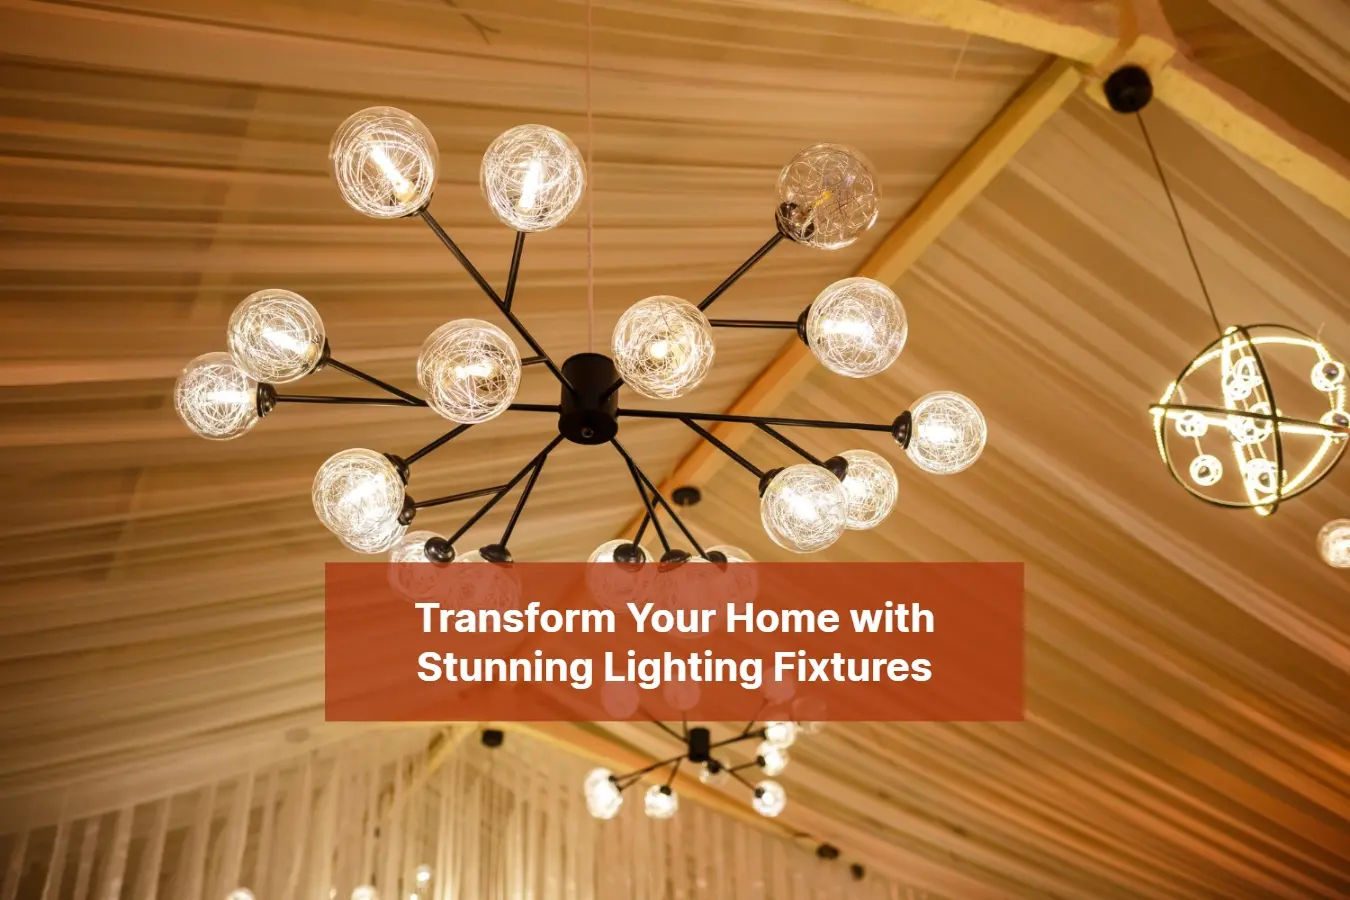 Transform Your Home with Stunning Lighting Fixtures